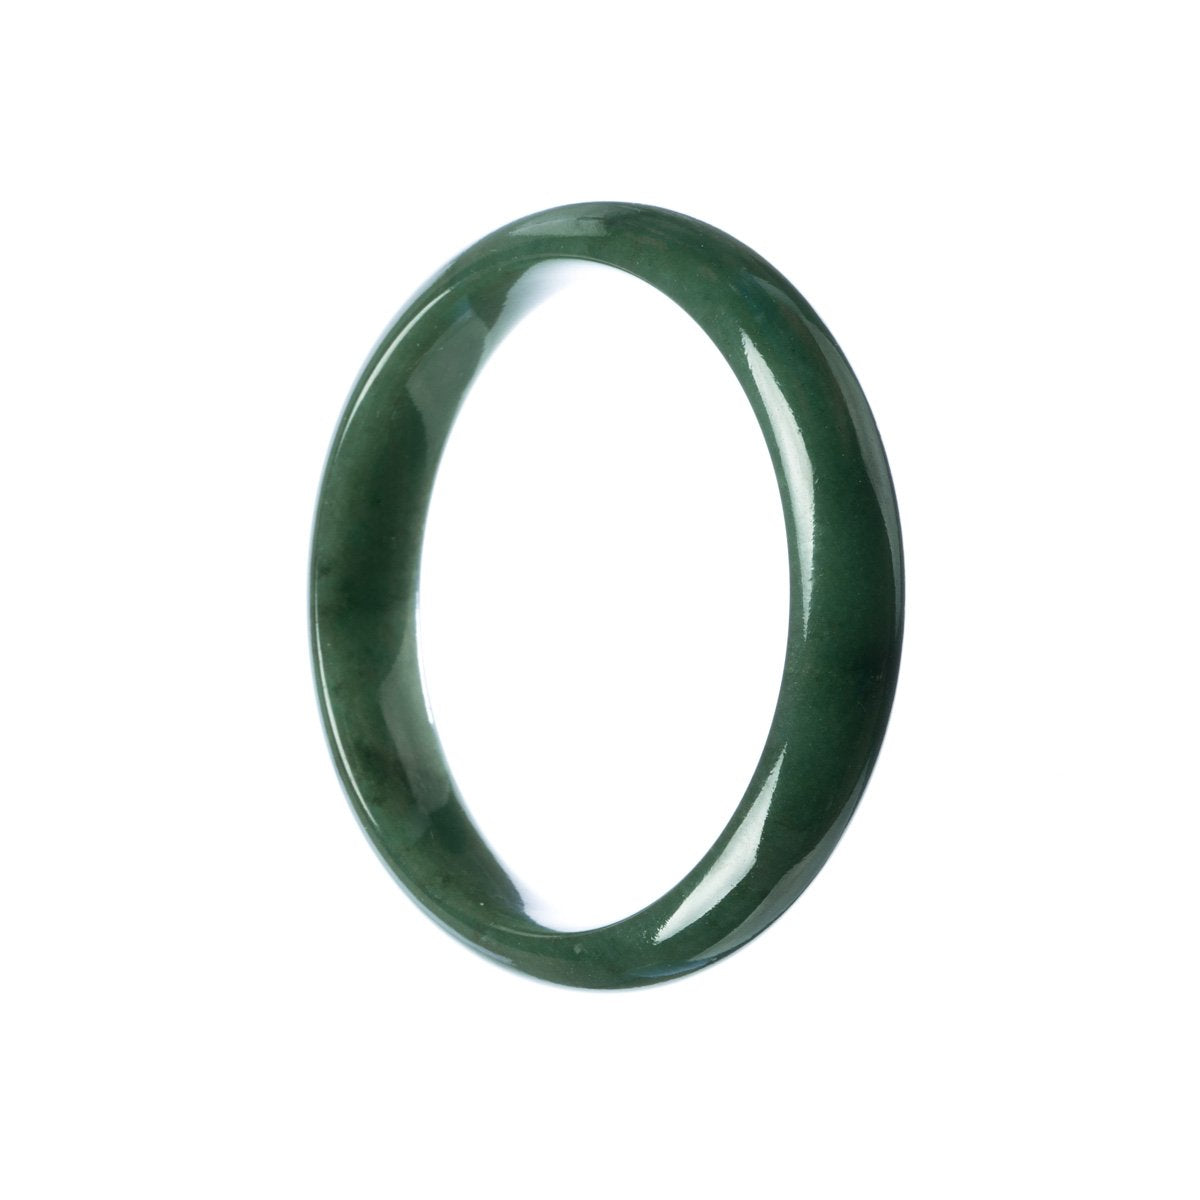 A beautiful green jade bracelet in the shape of a half moon, measuring 57mm. This authentic piece is untreated, showcasing the natural beauty and uniqueness of the jade. Perfect for adding a touch of elegance to any outfit. From the MAYS collection.